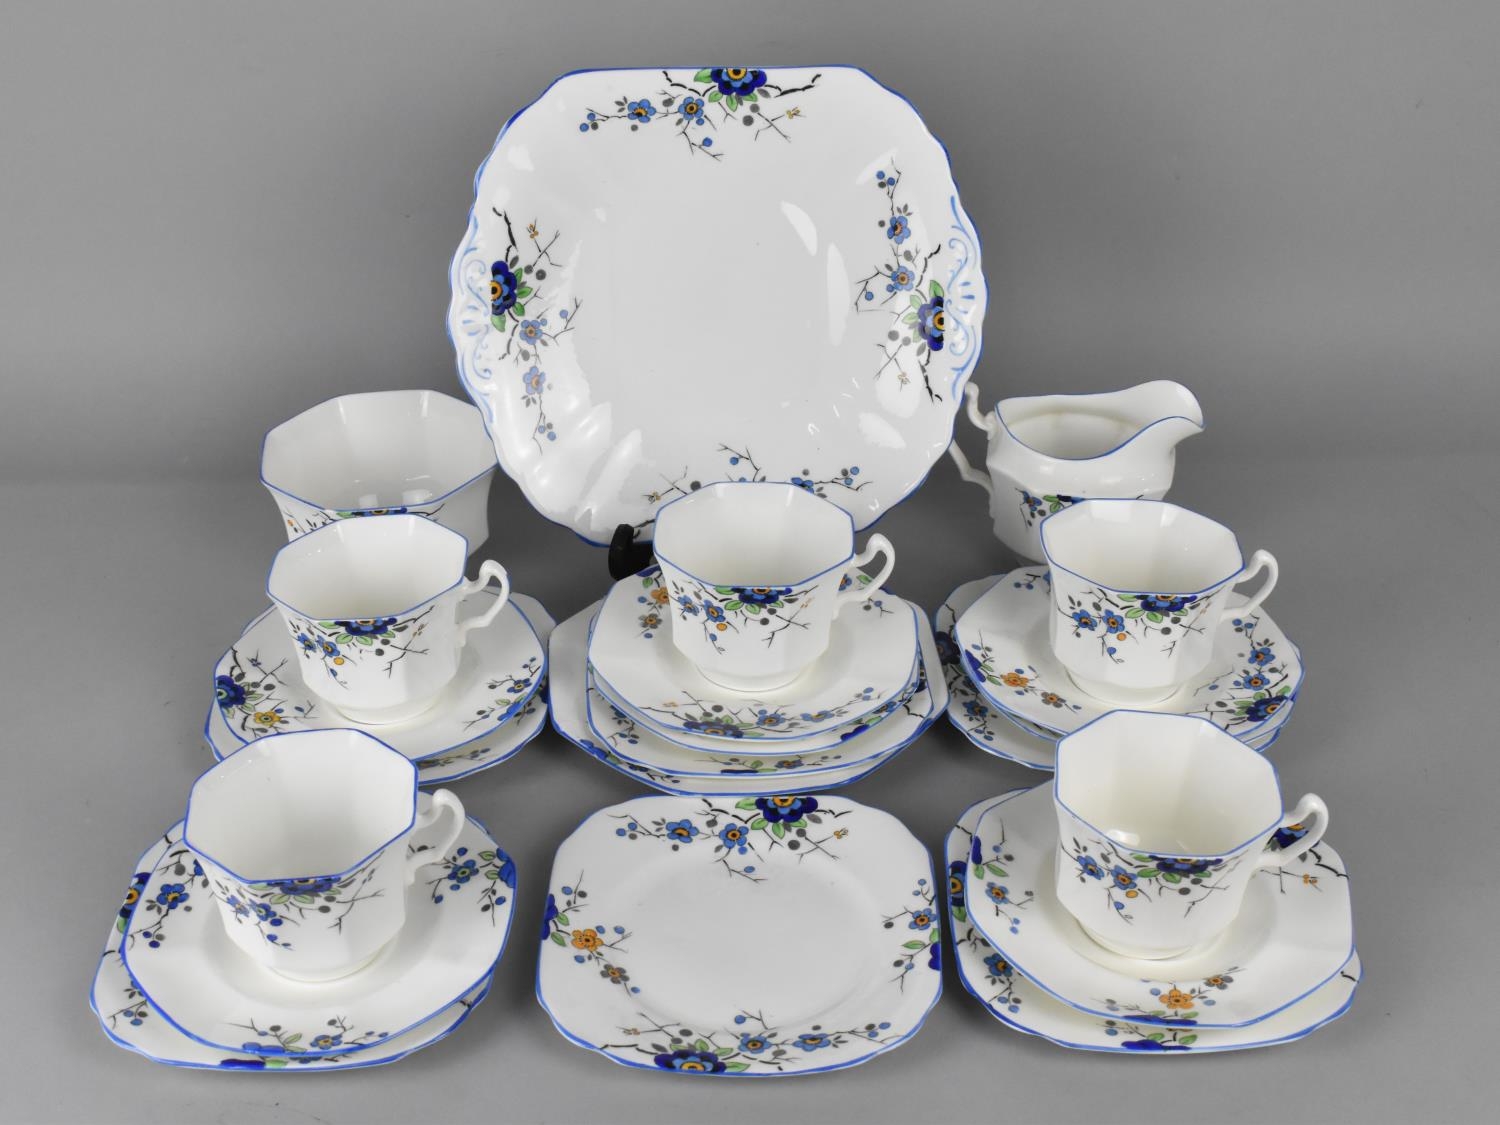 A Hand Painted Fenton Tea Set with Blue Floral Trim to Comprise Five Cups, Six Saucers, Six Side